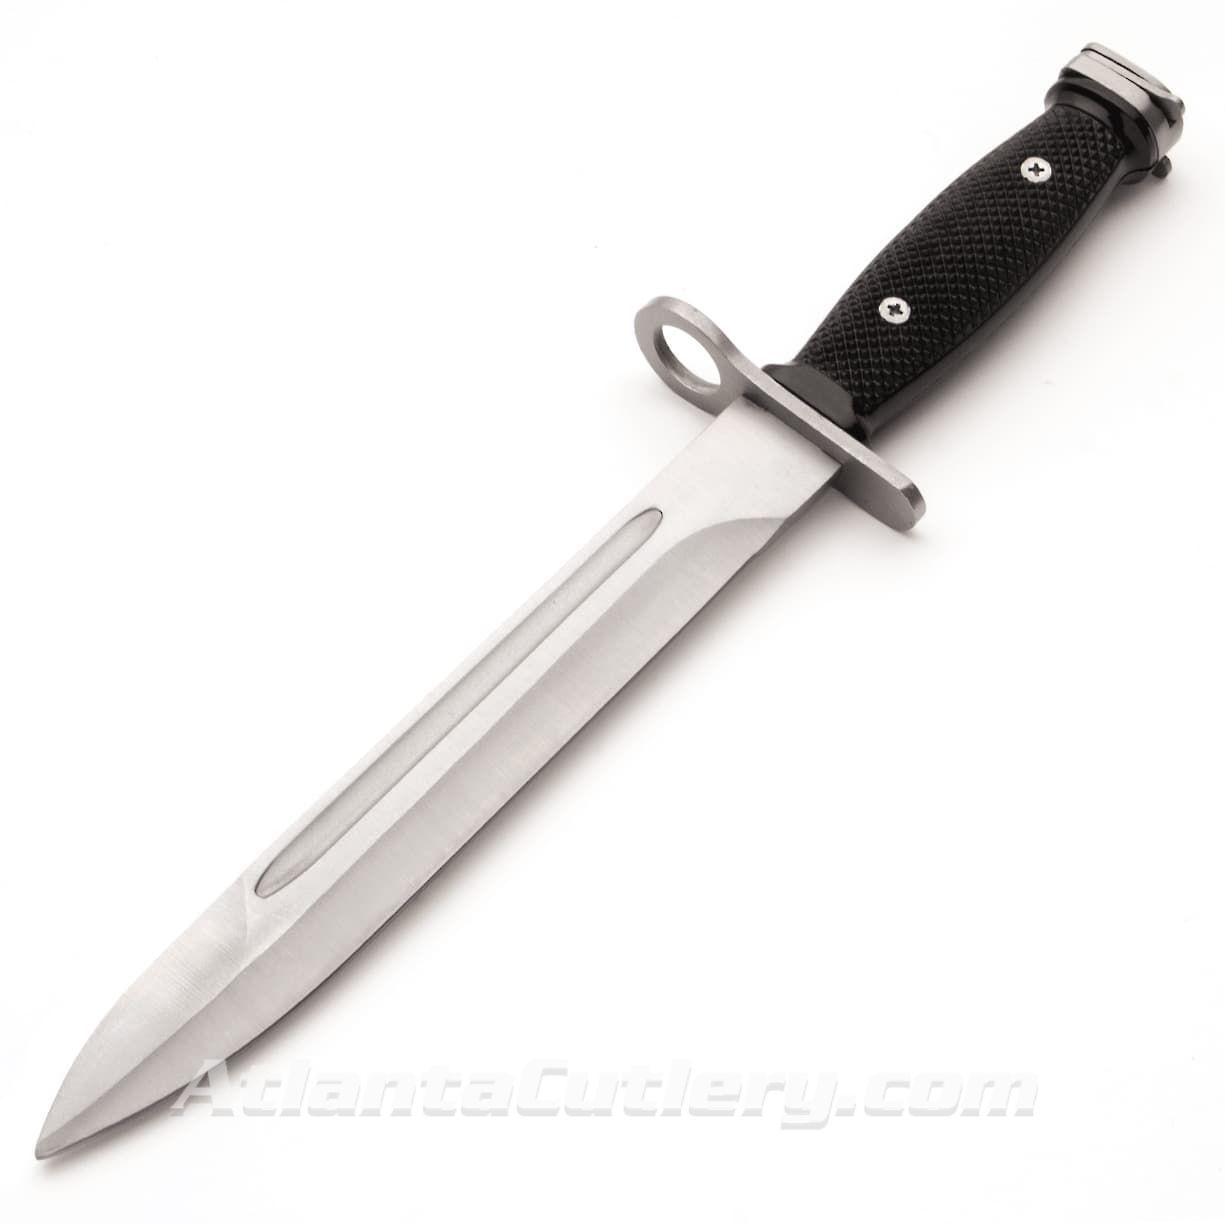 big M16 Military Dagger with satin finish spear-point blade, synthetic handle and checkered grip in a bayonet style knife